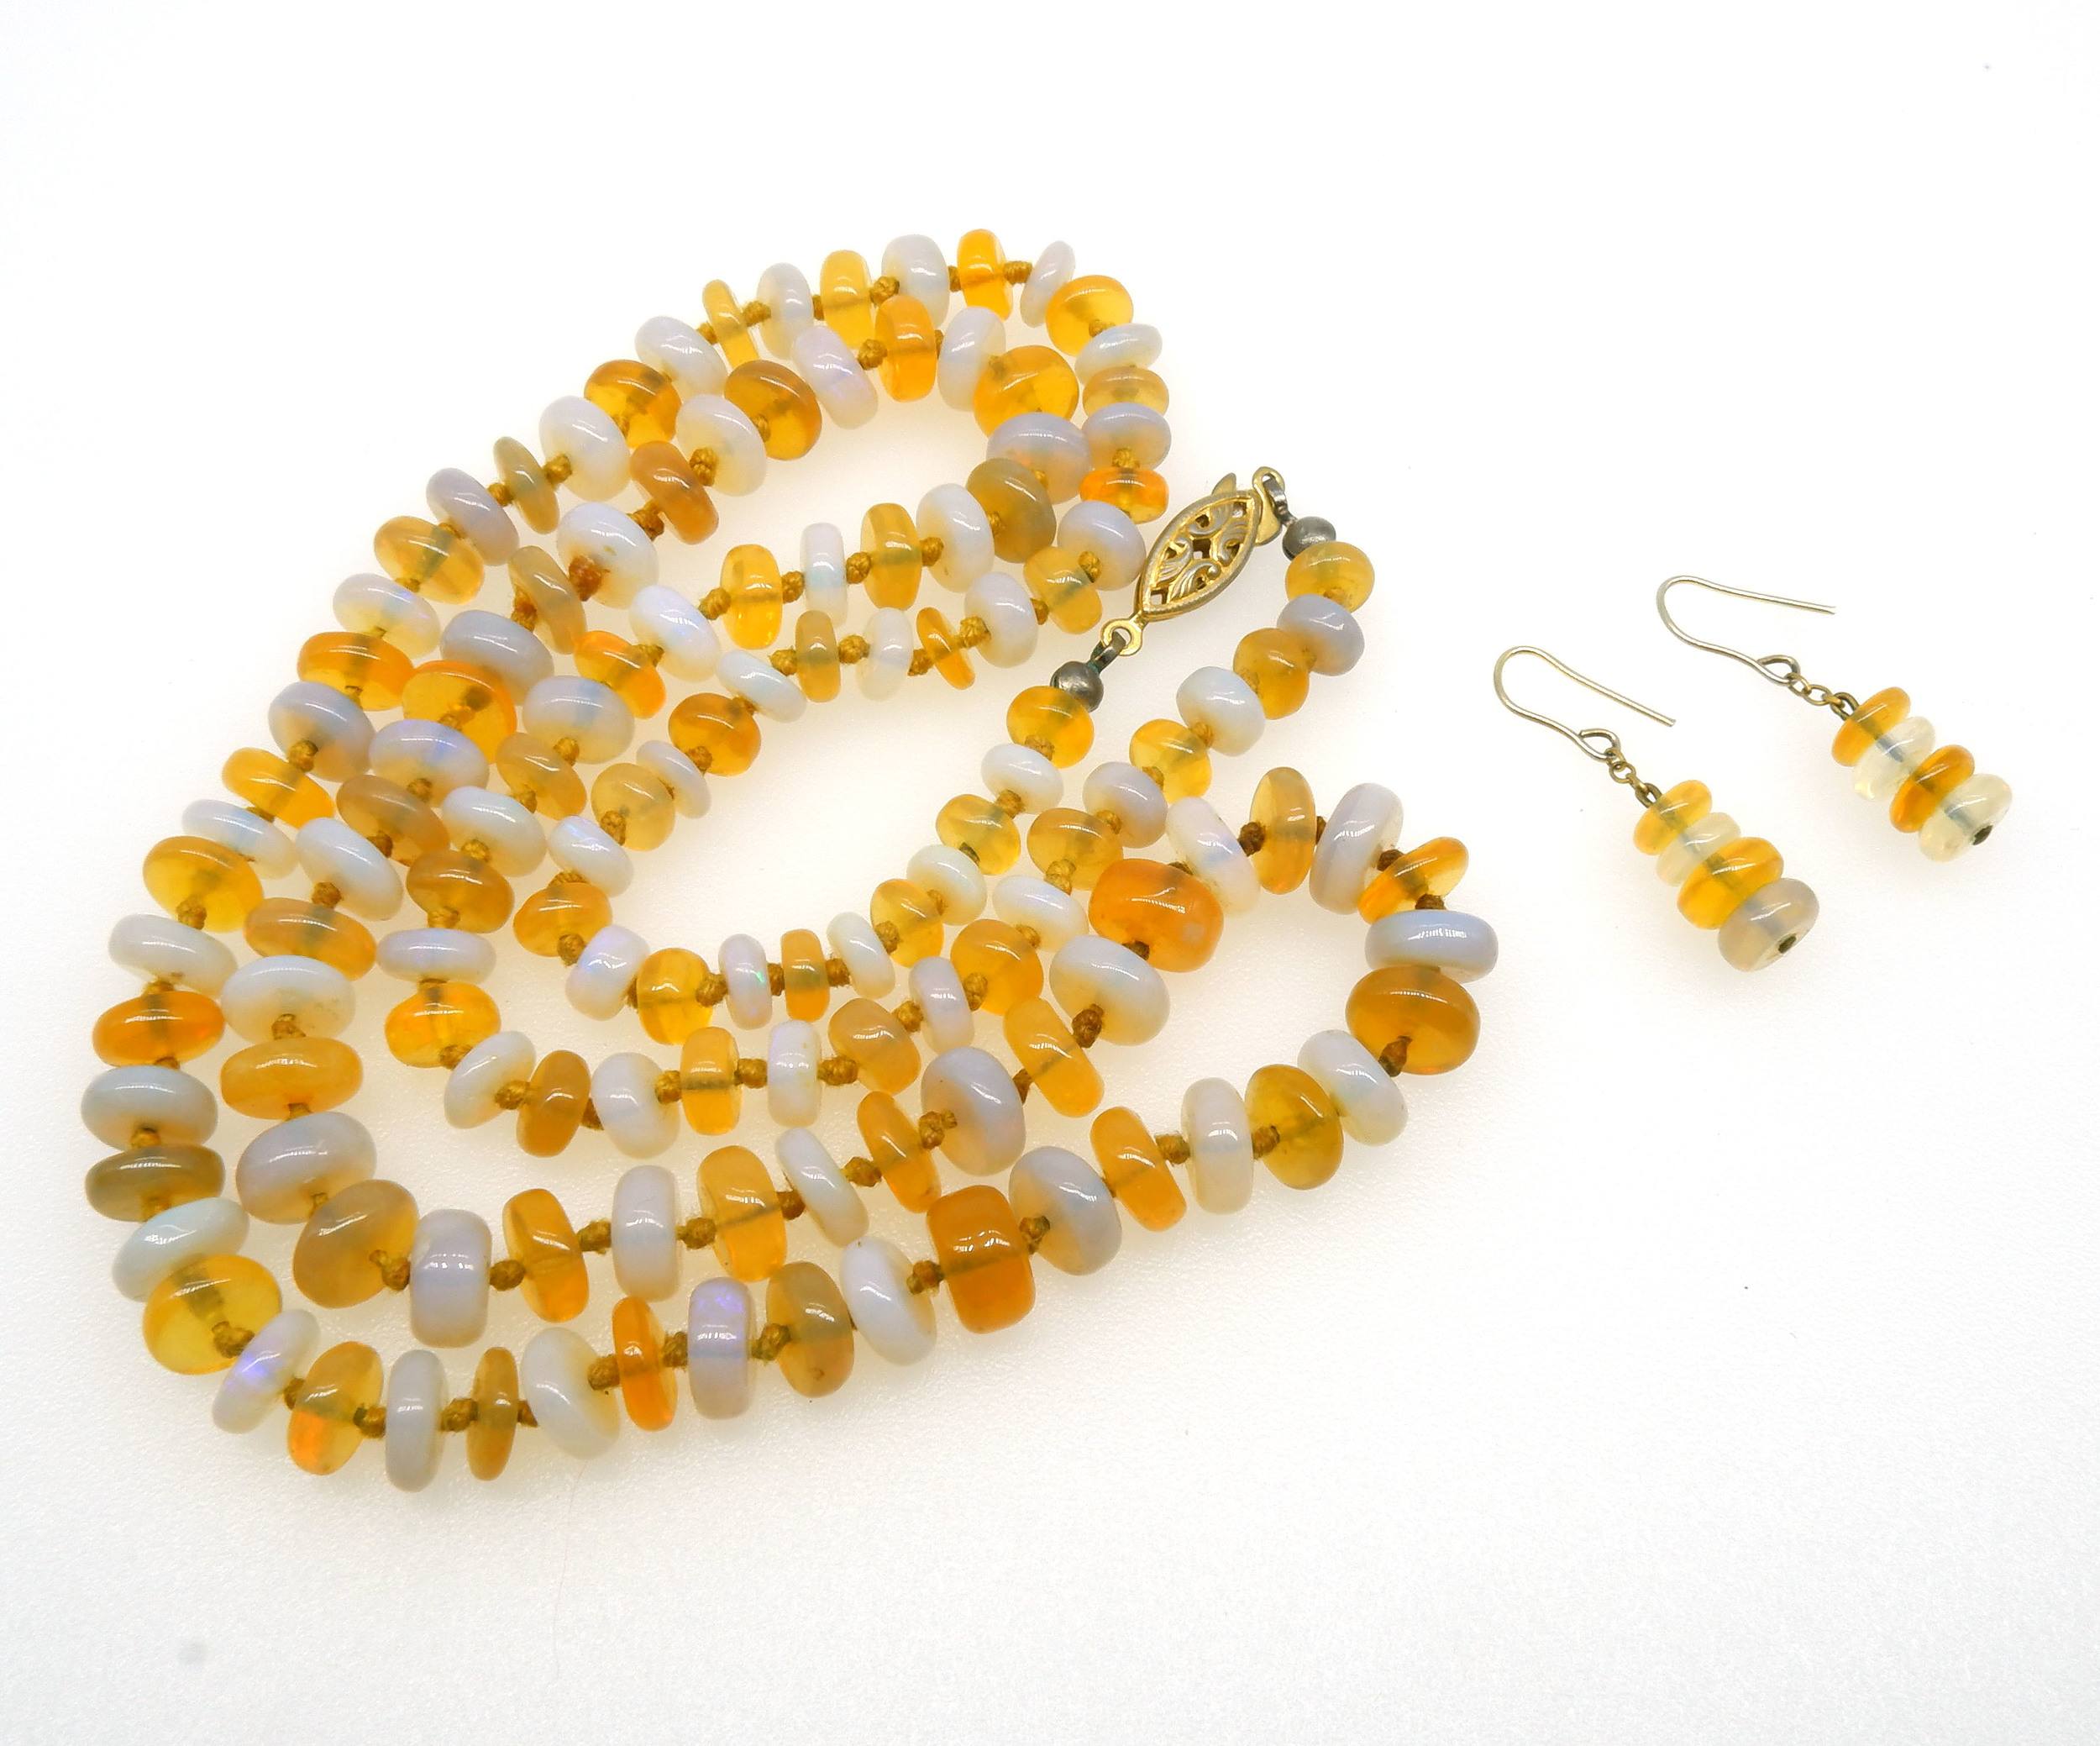 'Alternating White and Pale Yellow Opal Rondelles Necklace and Matching Earrings with Four Beads'